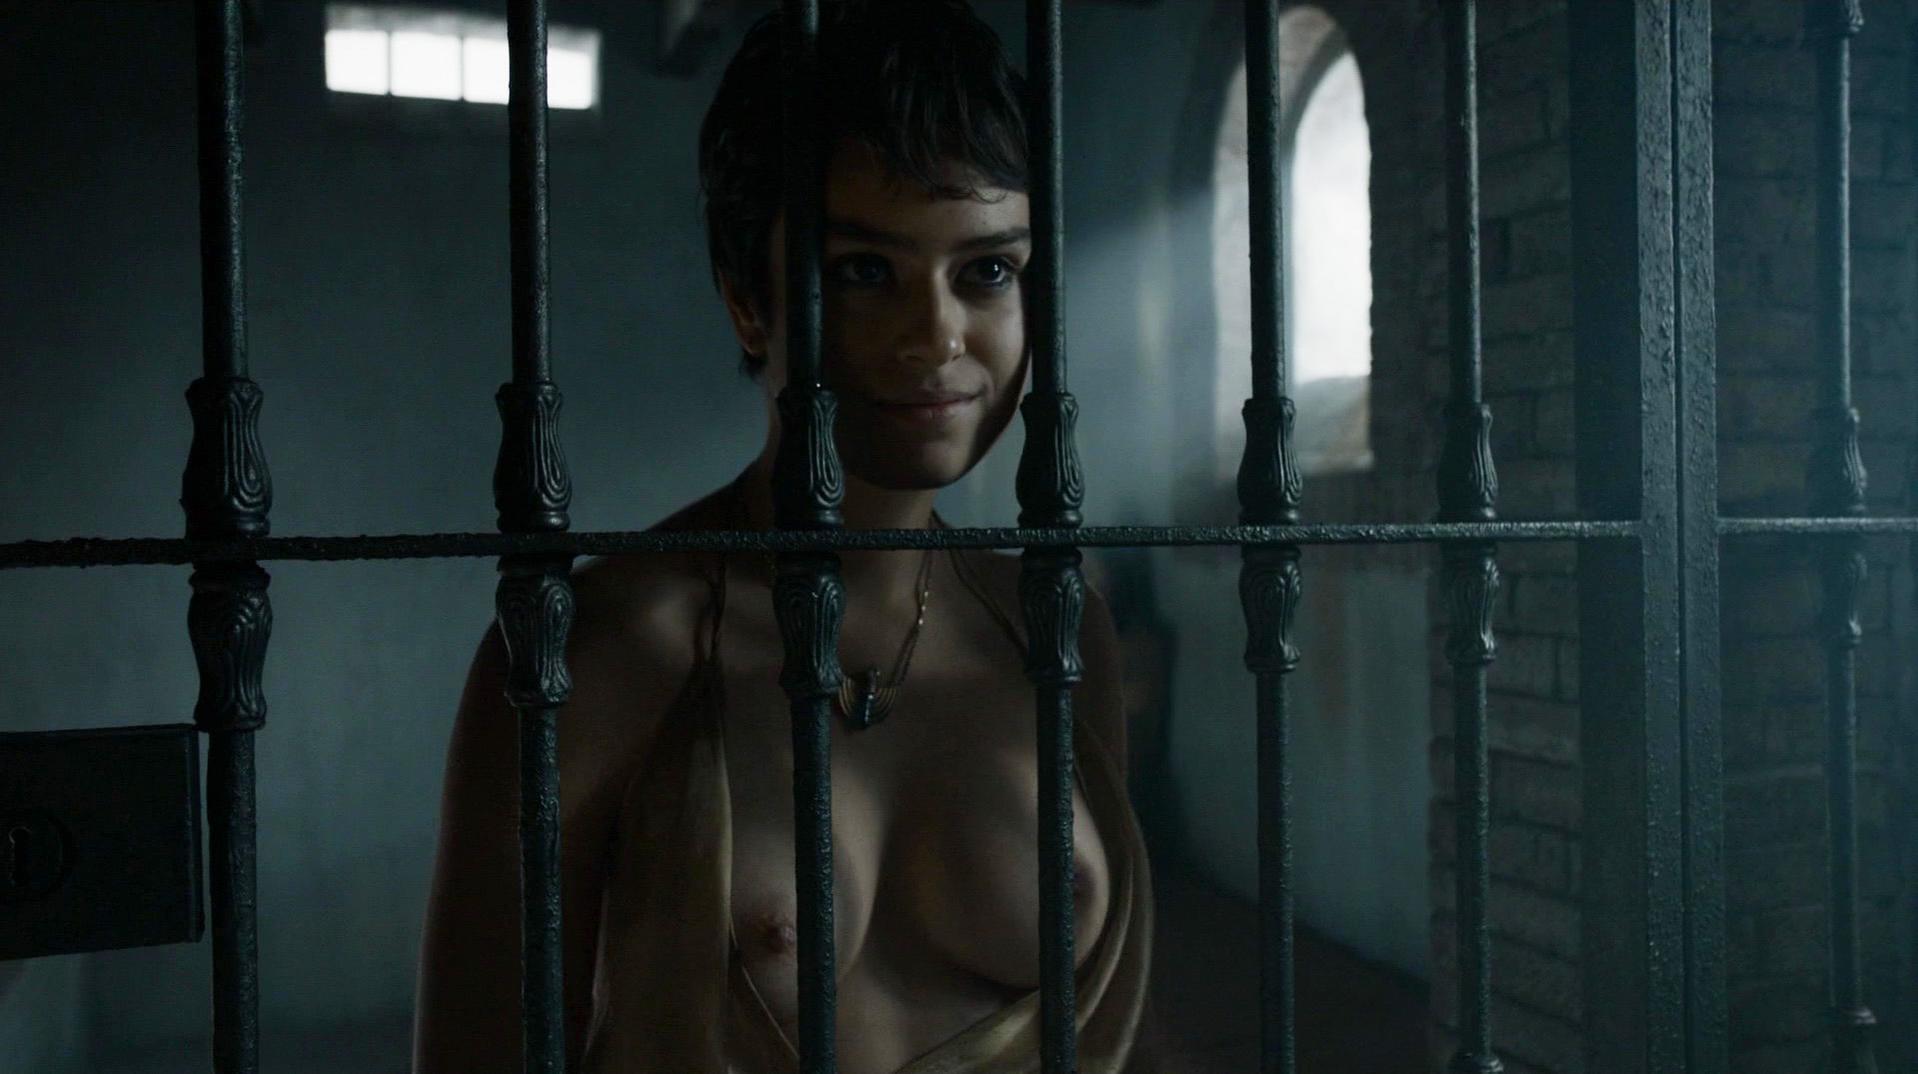 Rosabell Laurenti Sellers nude - Game of Thrones s05e07 (2015)